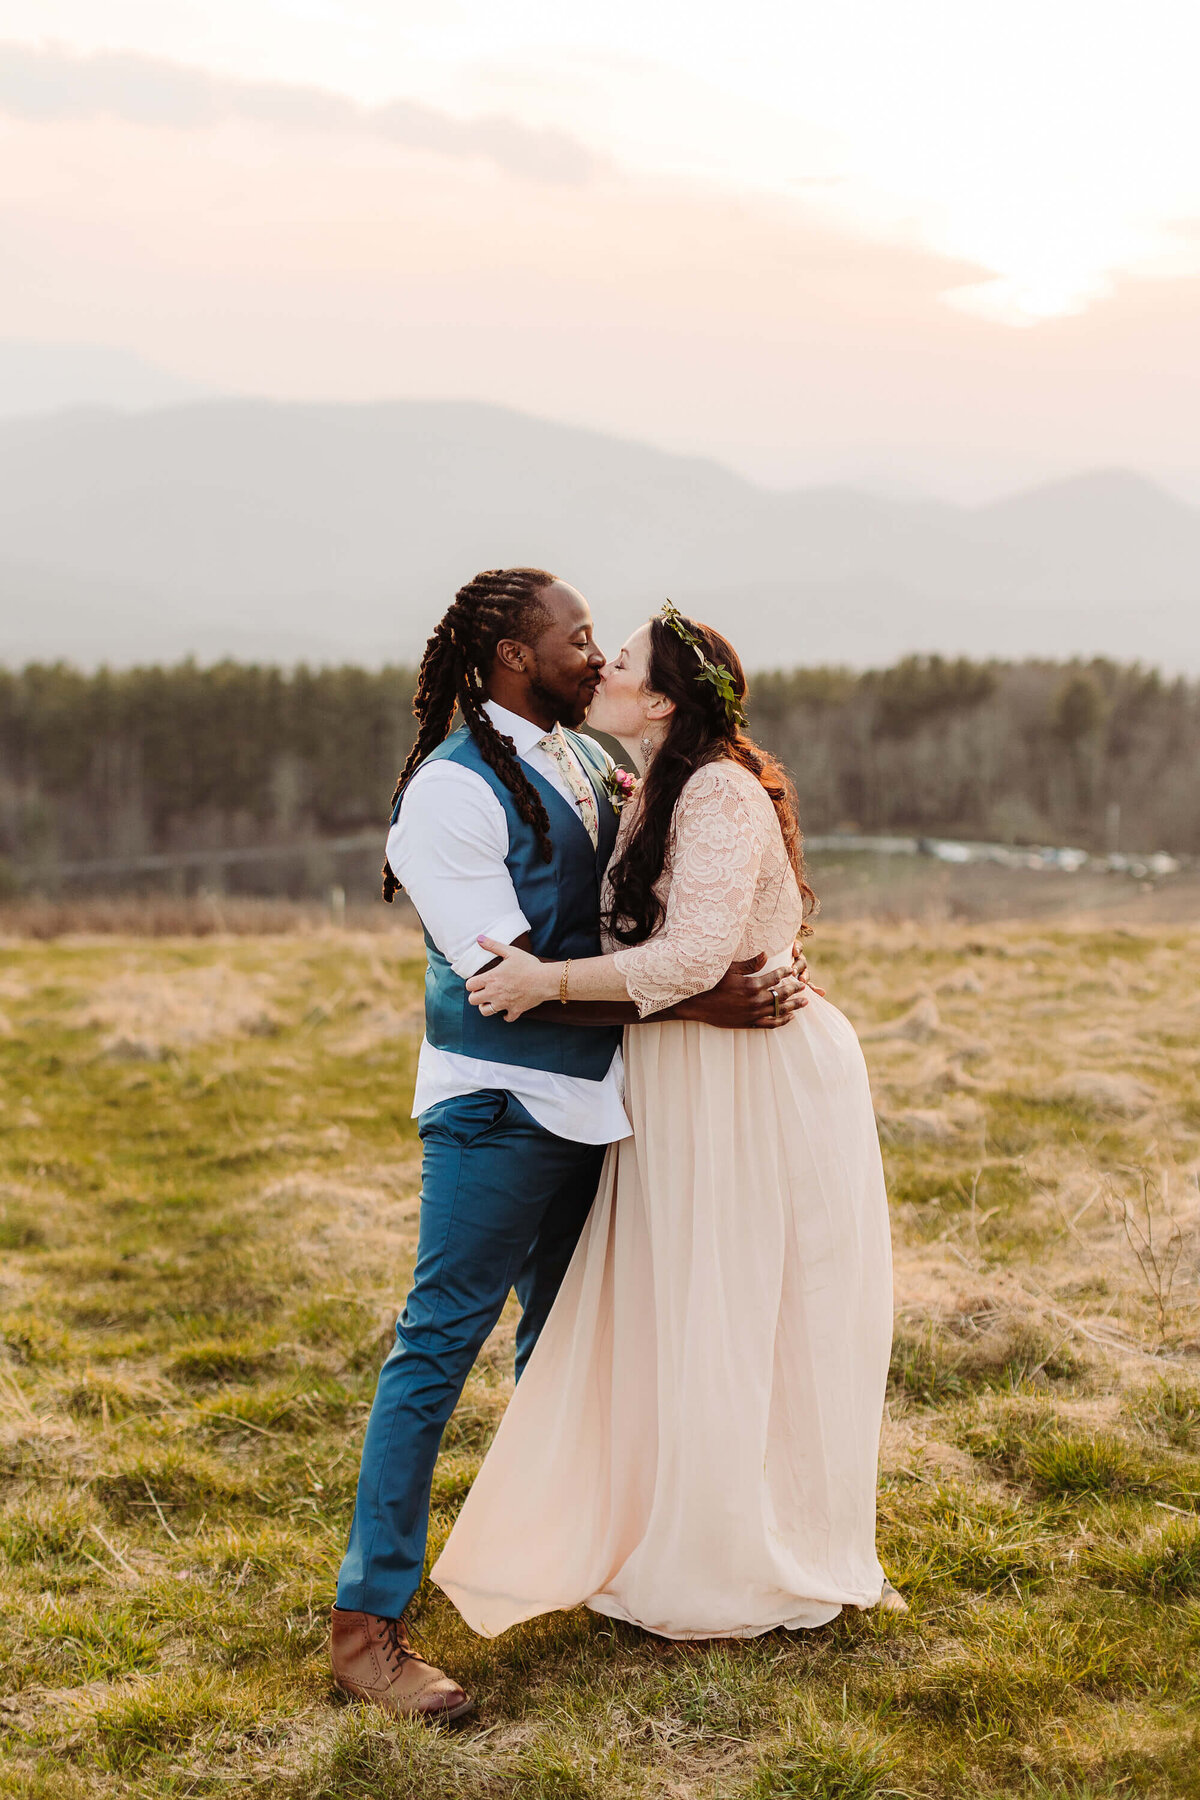 Max-Patch-Sunset-Mountain-Elopement-85